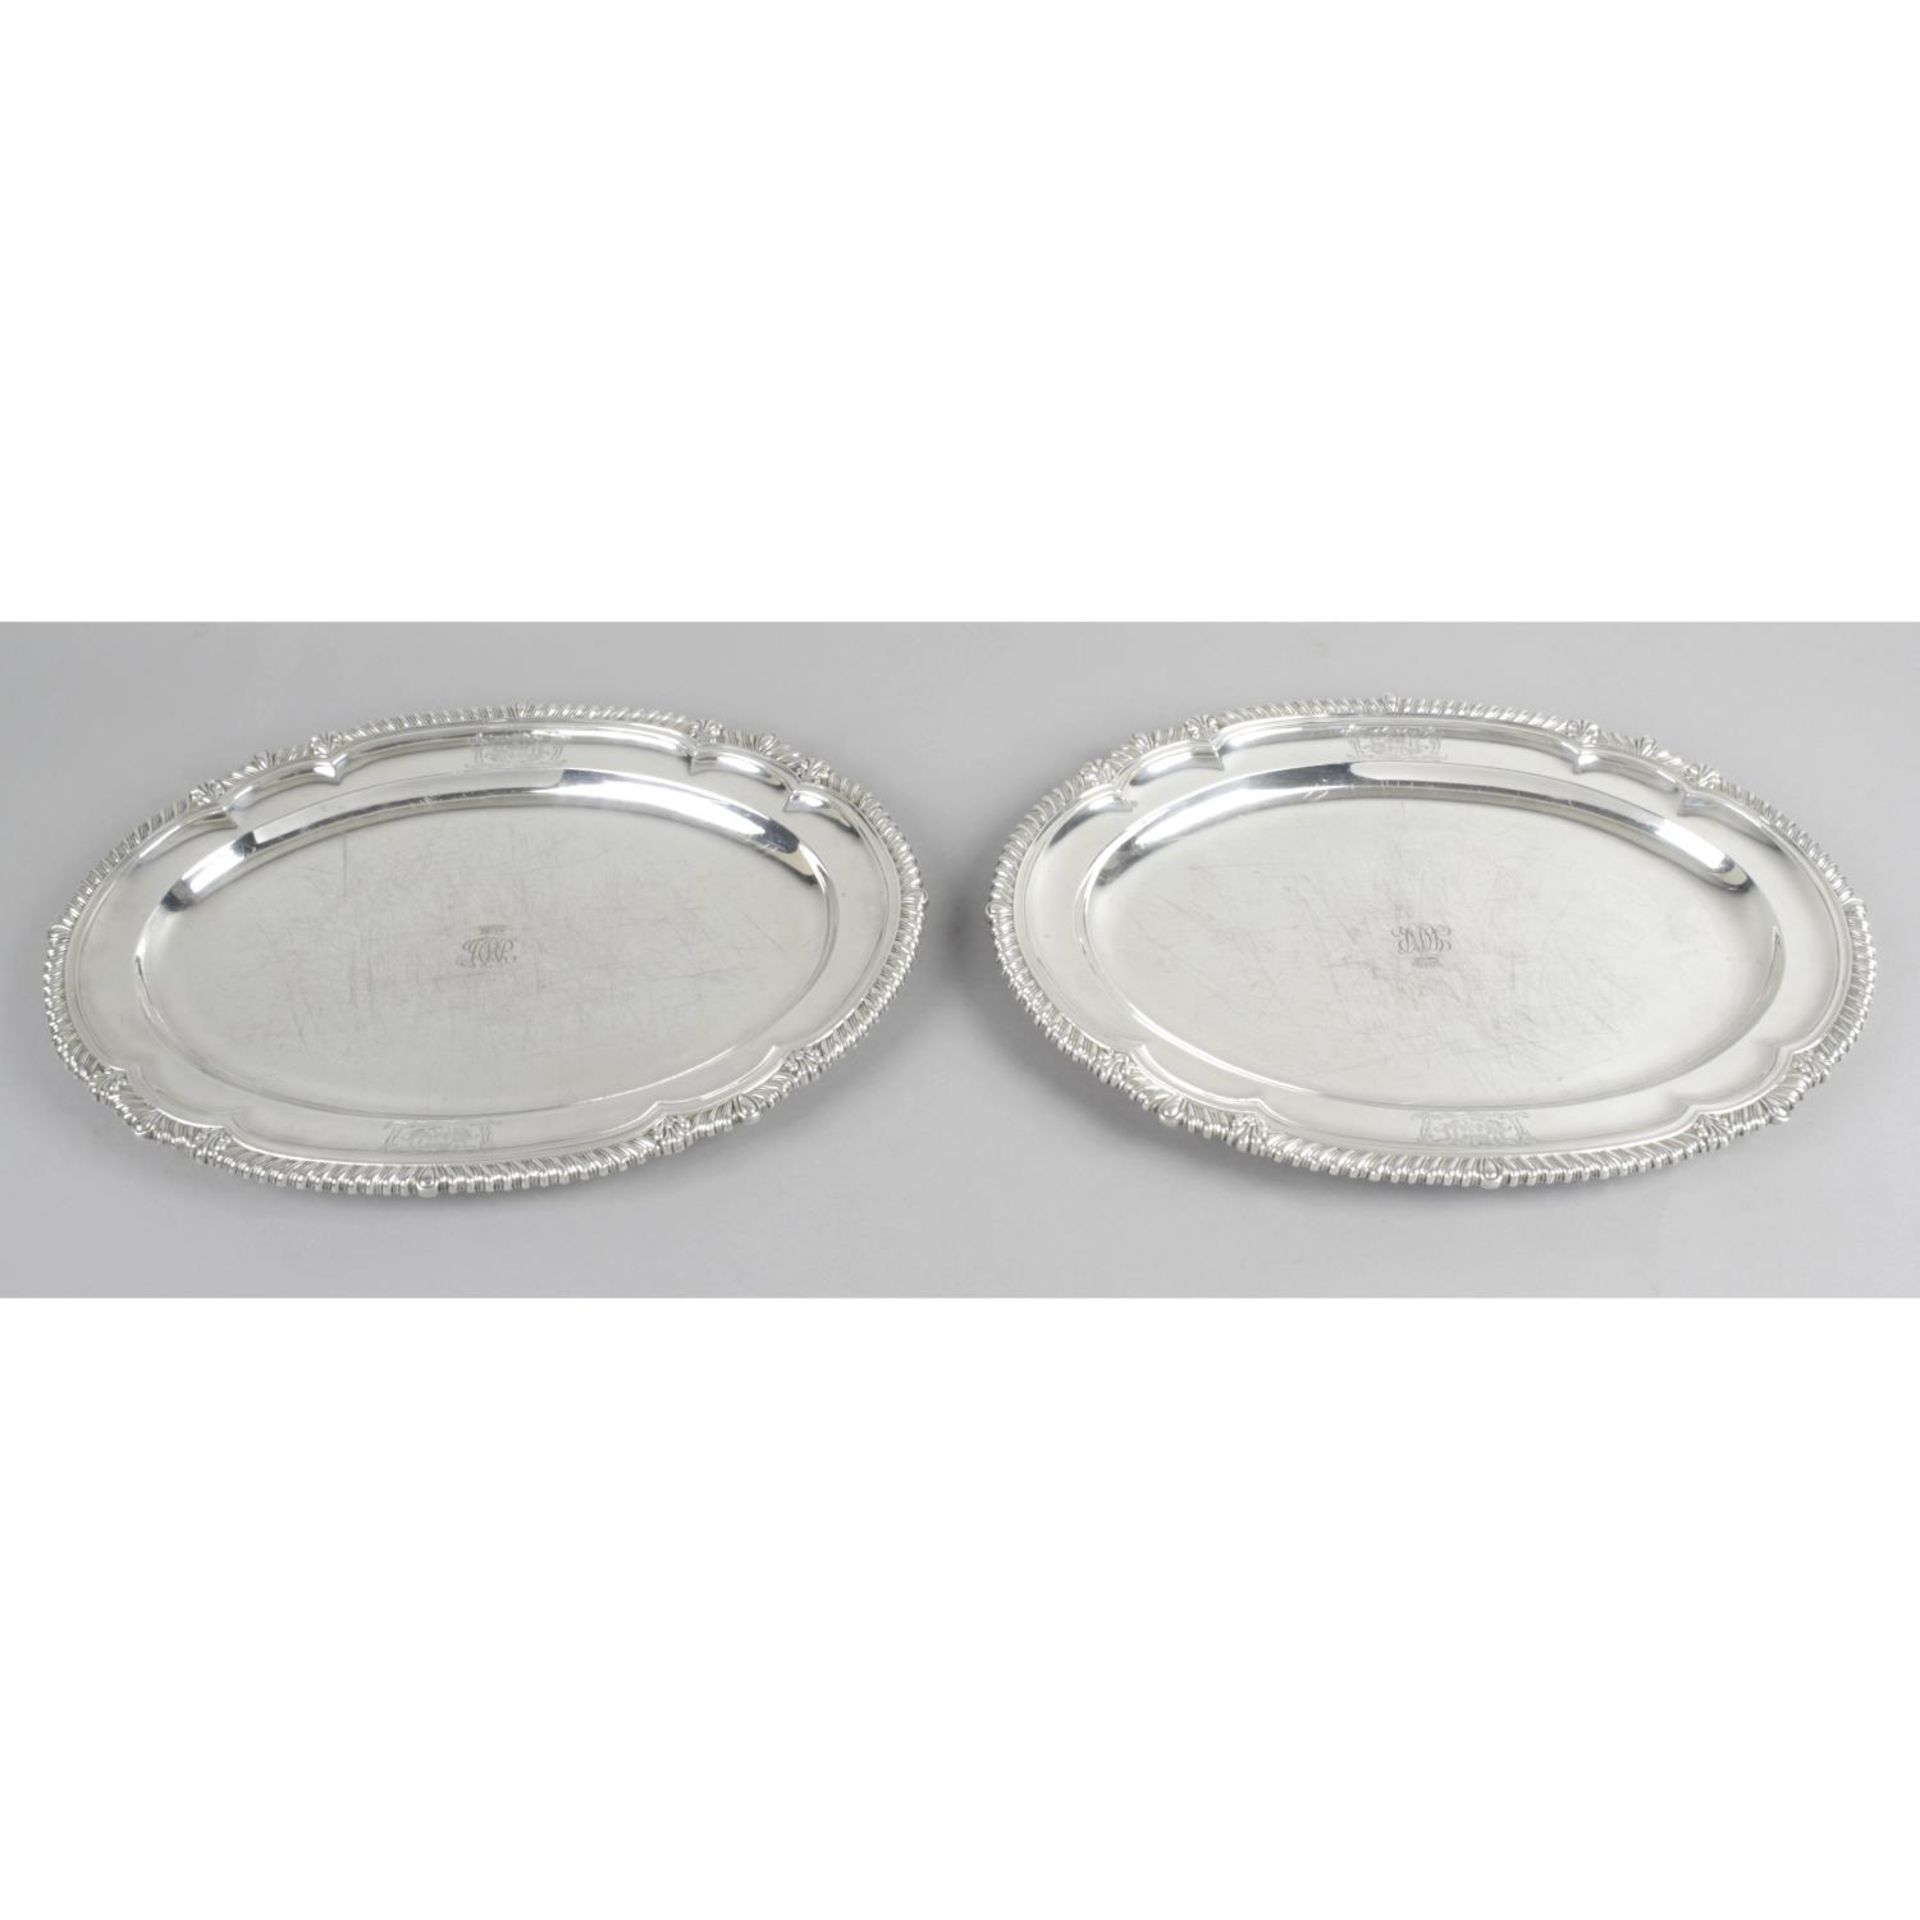 A pair of late George III silver meat dishes by Paul Storr,